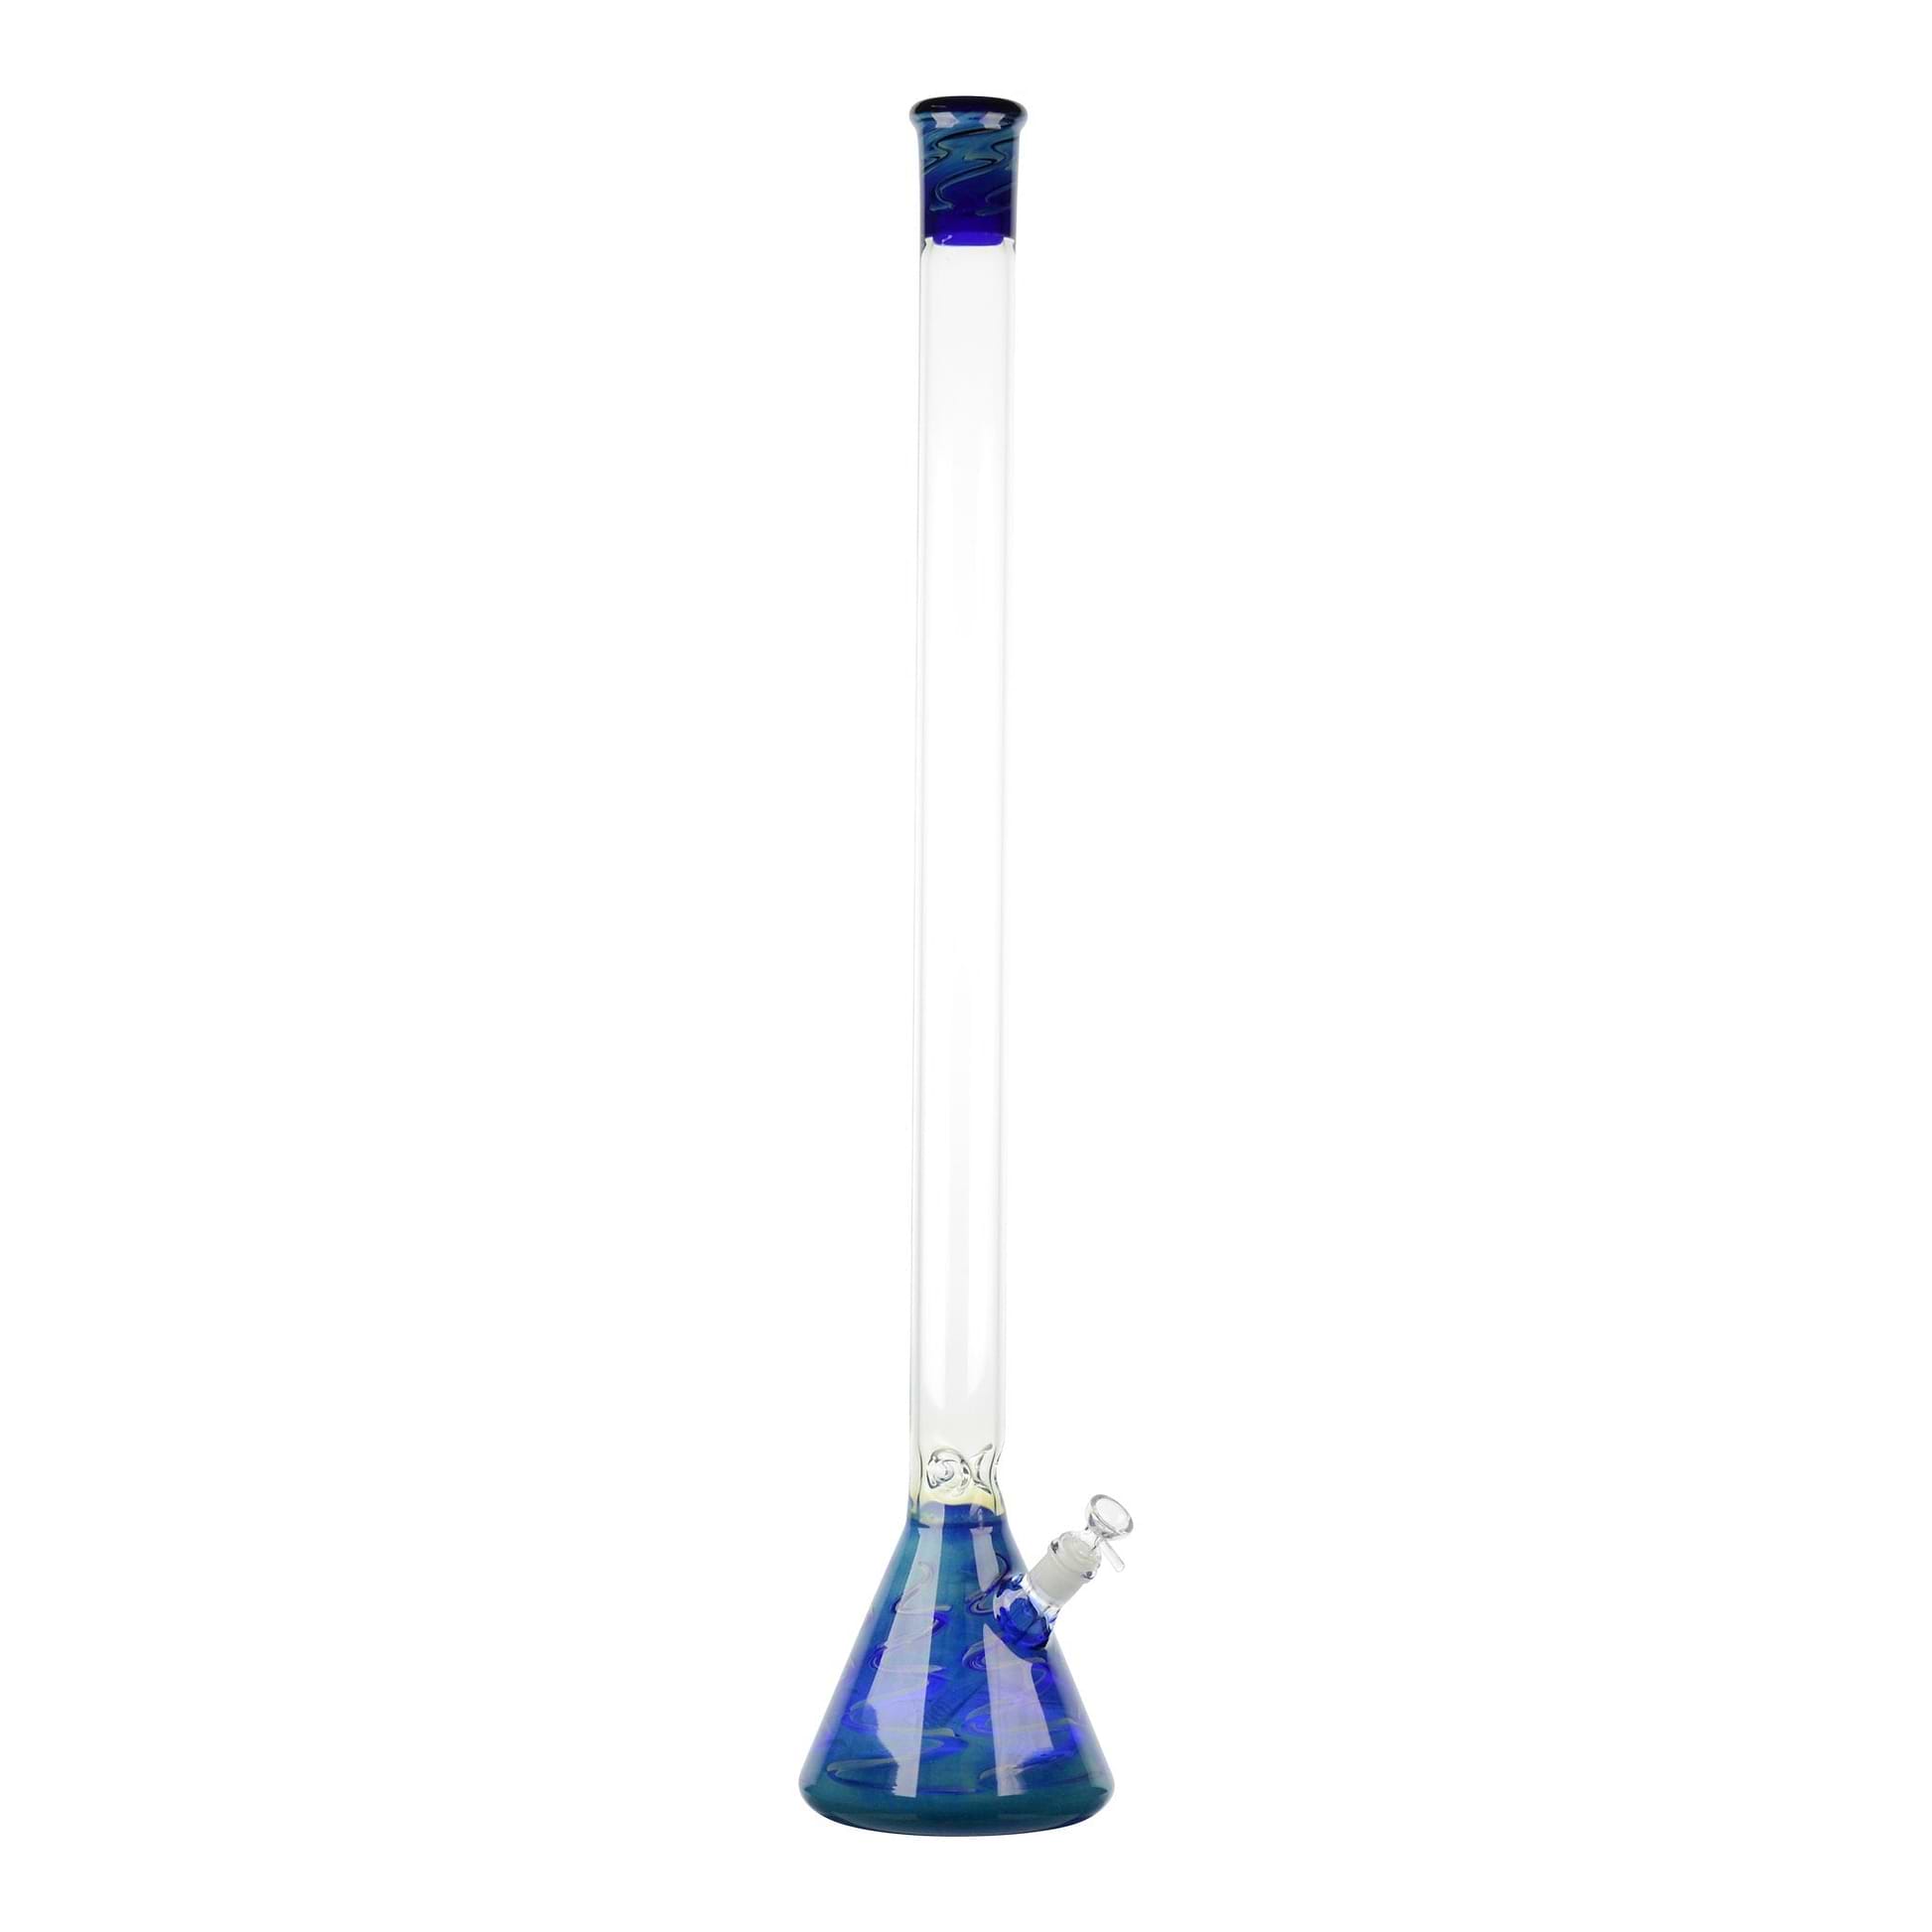 Full shot of huge 32 inch glass beaker bong with blue mouthpiece blue base bowl on right opening slightly visible